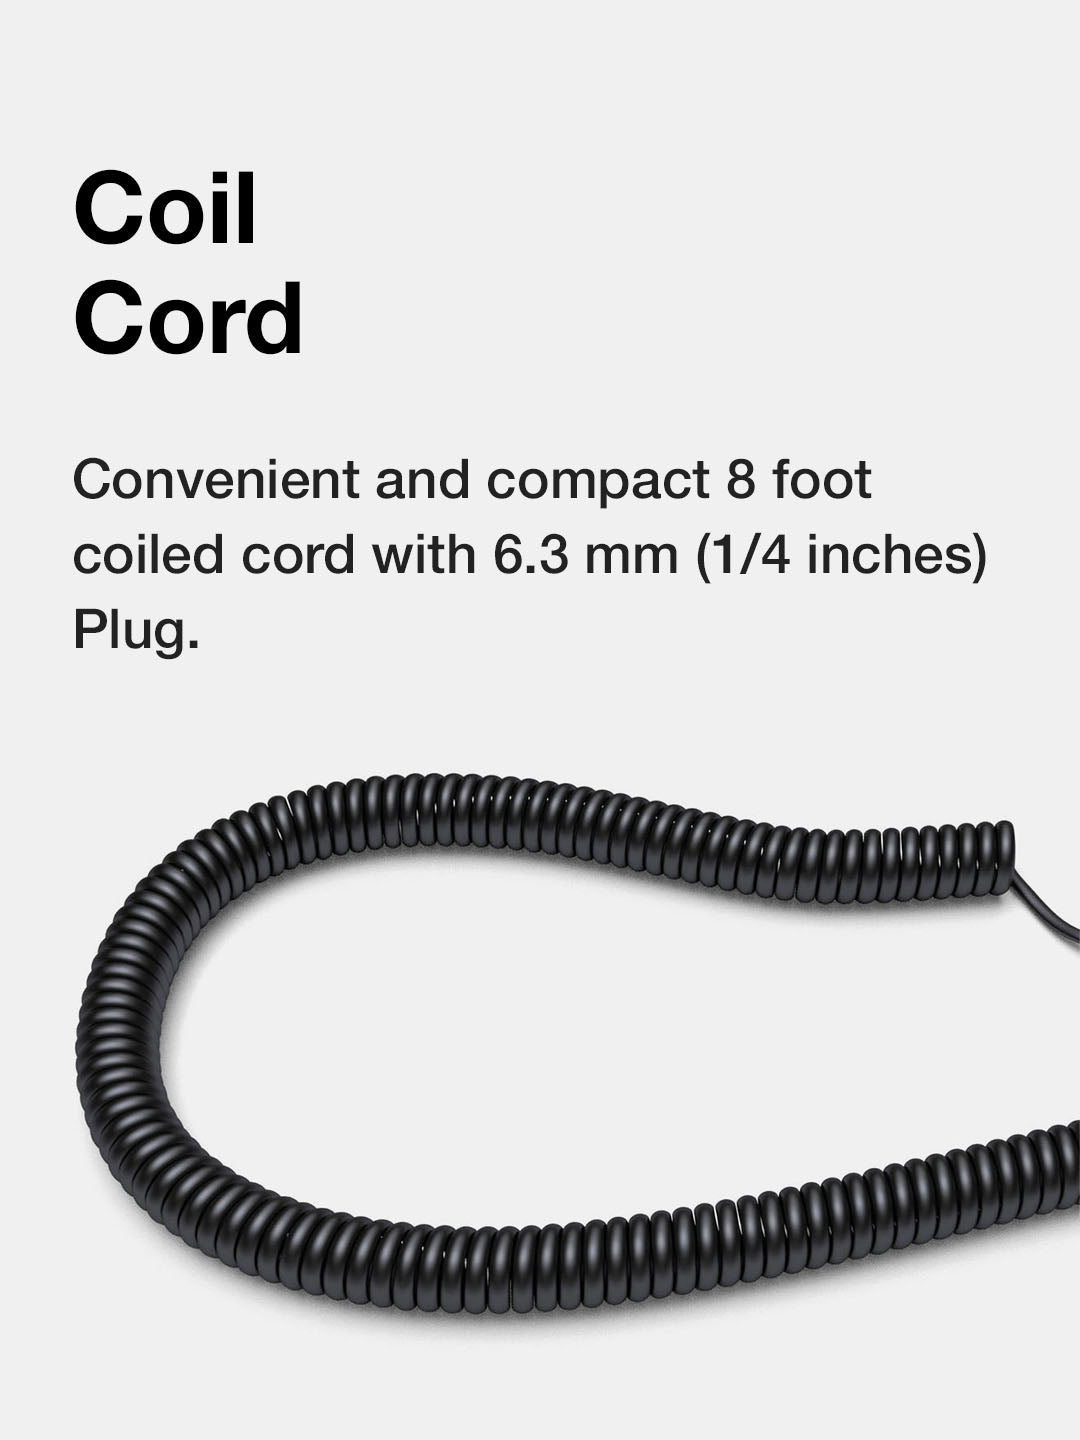 Pro4aa coil cord feature image